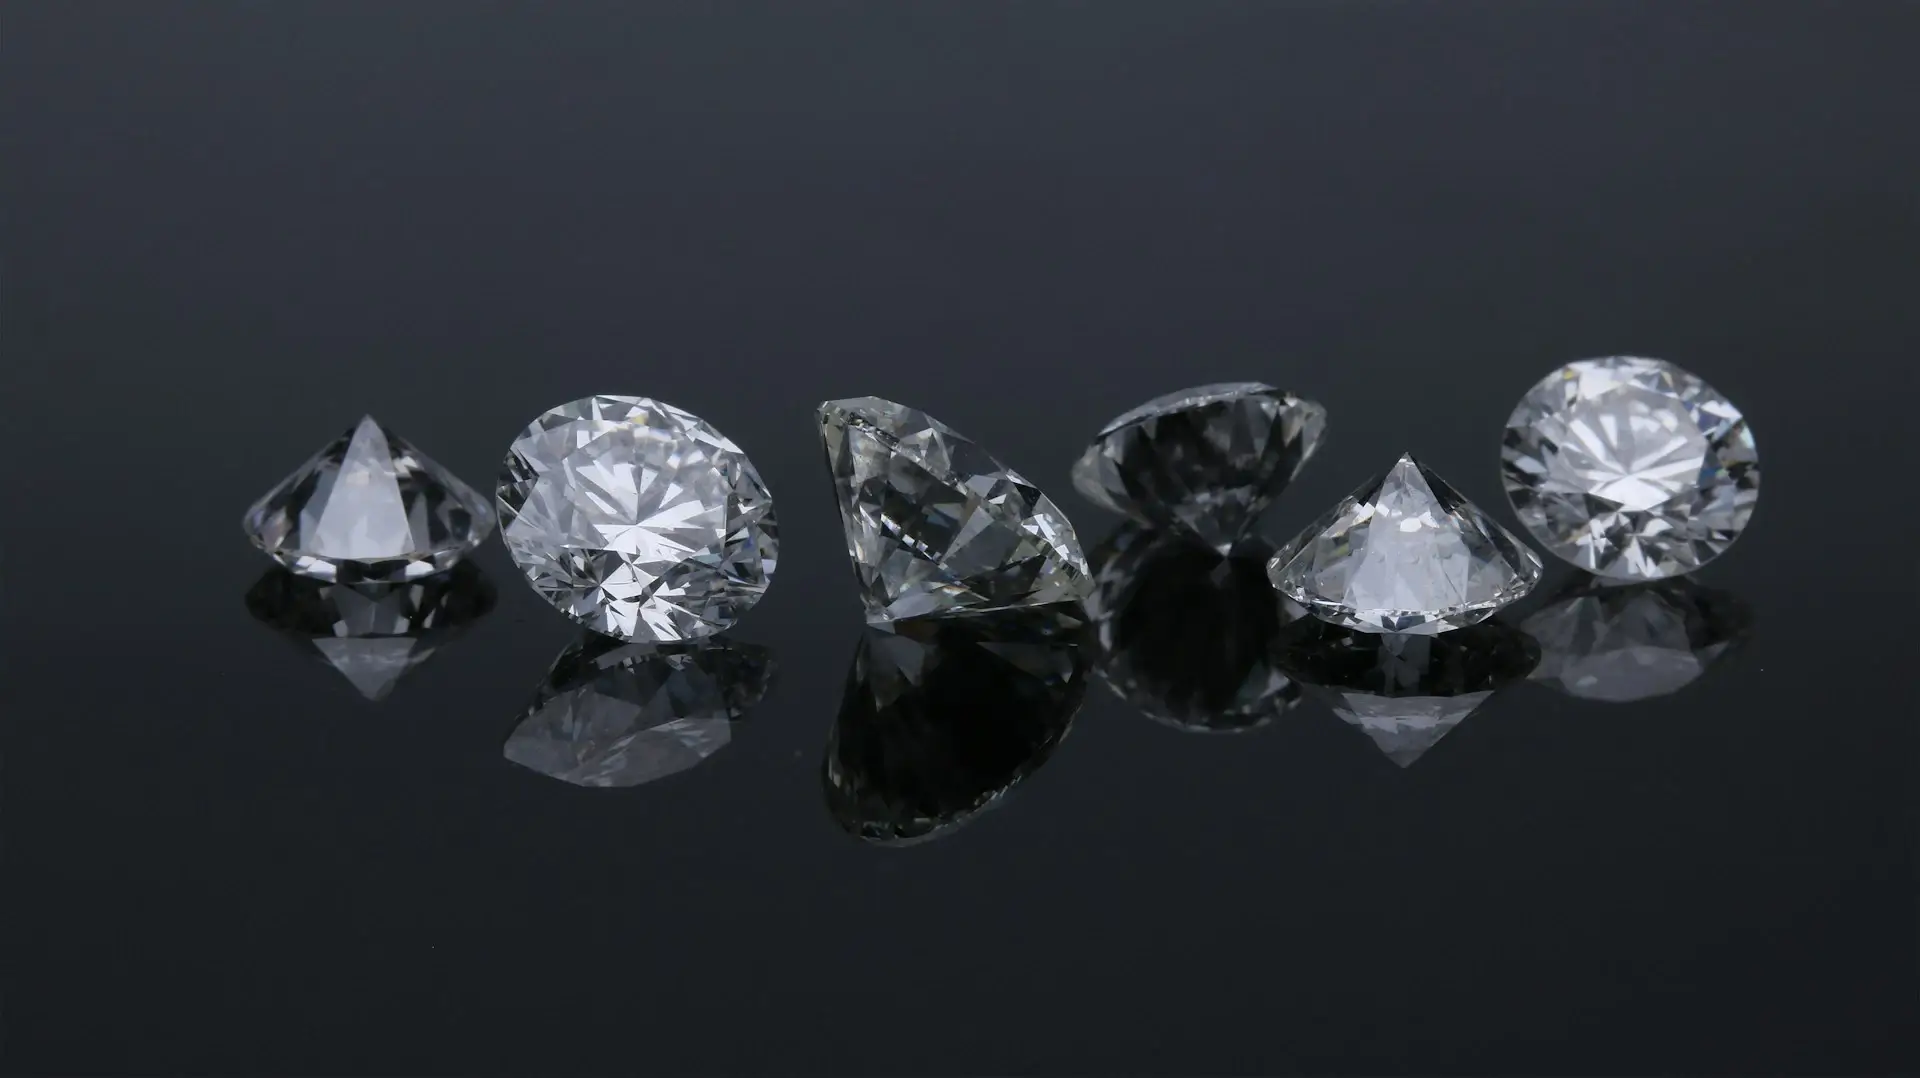 Diamond Industry Development BRICS Countries Push for Freedom of Trade and Cooperation